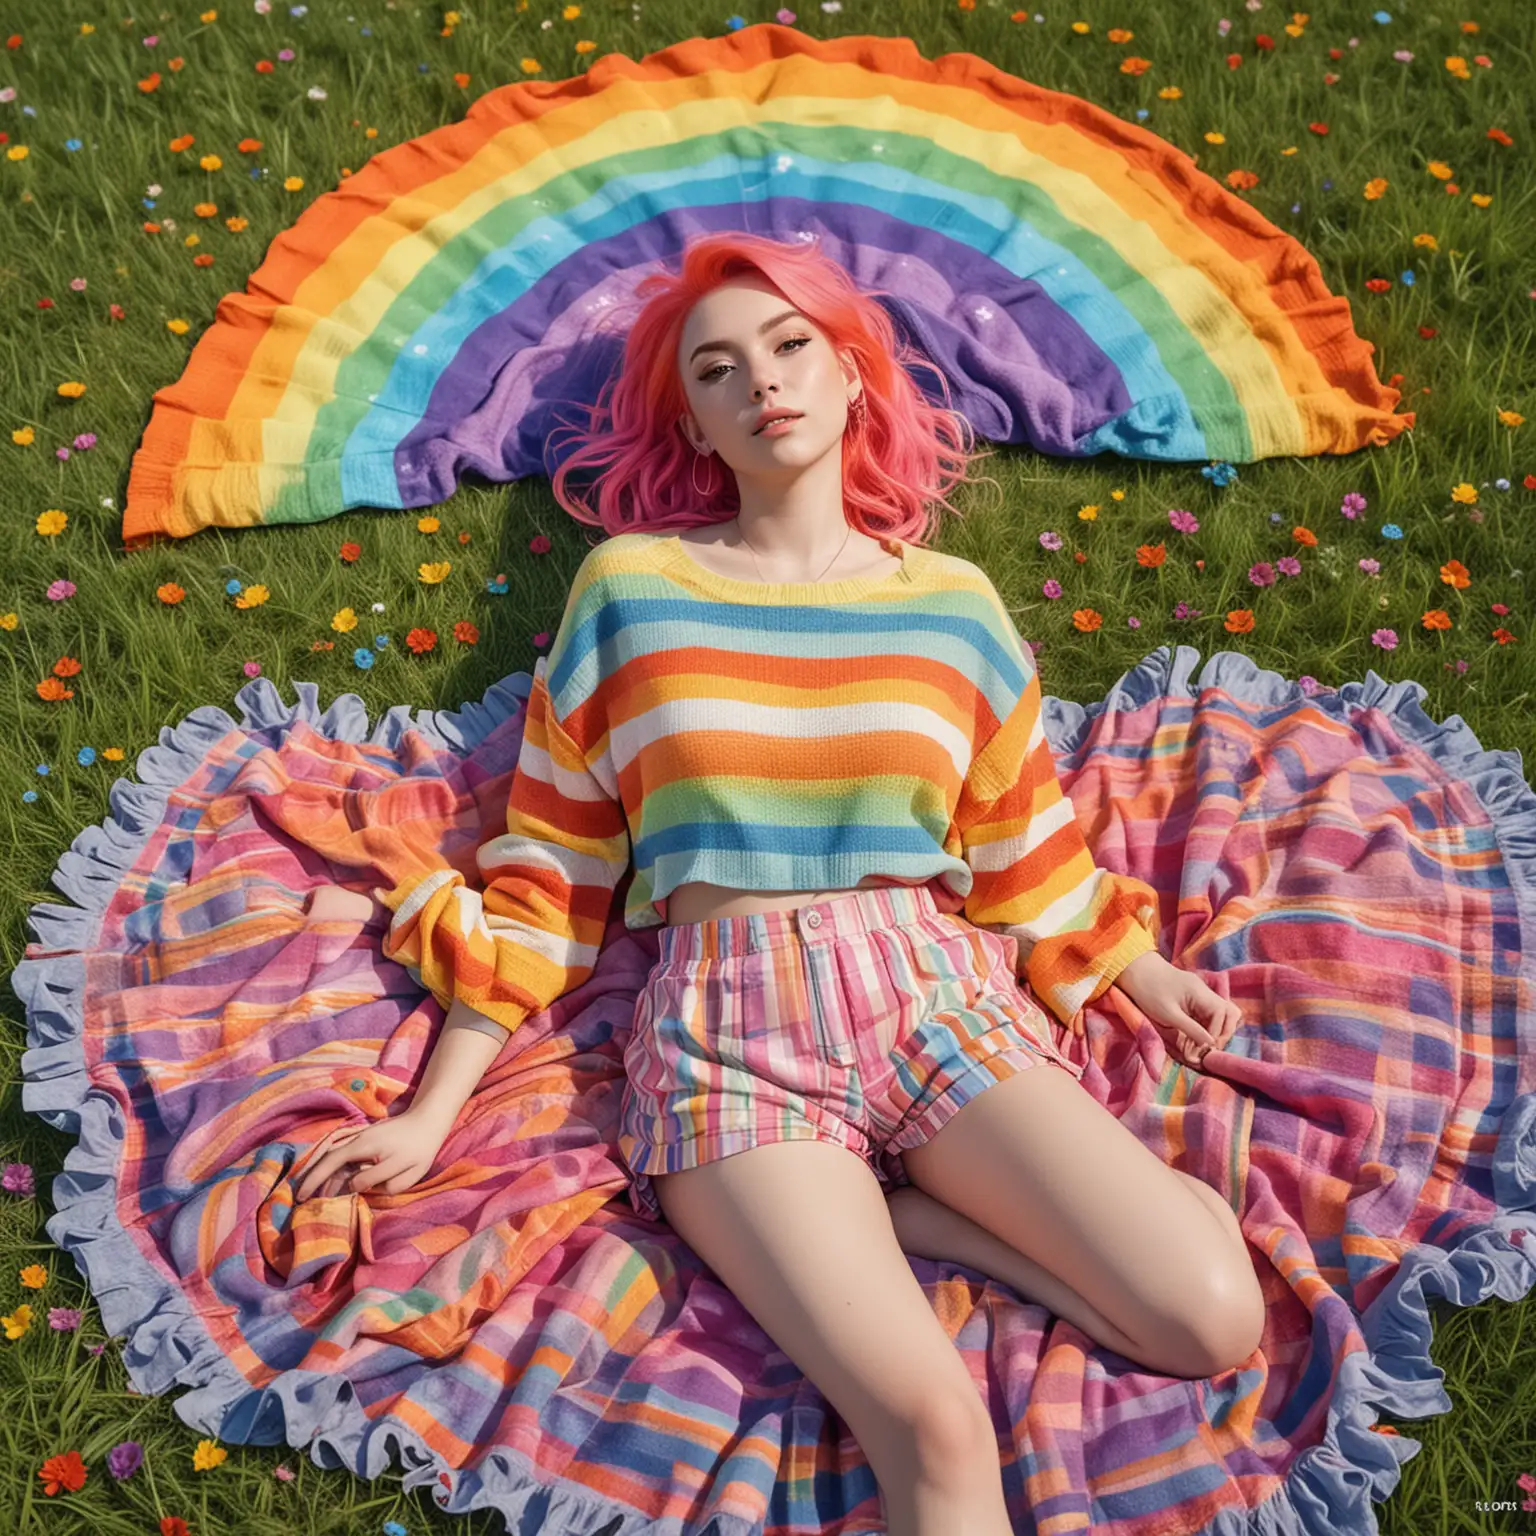 Kawaii Style Young Woman Relaxing under Rainbow Sky